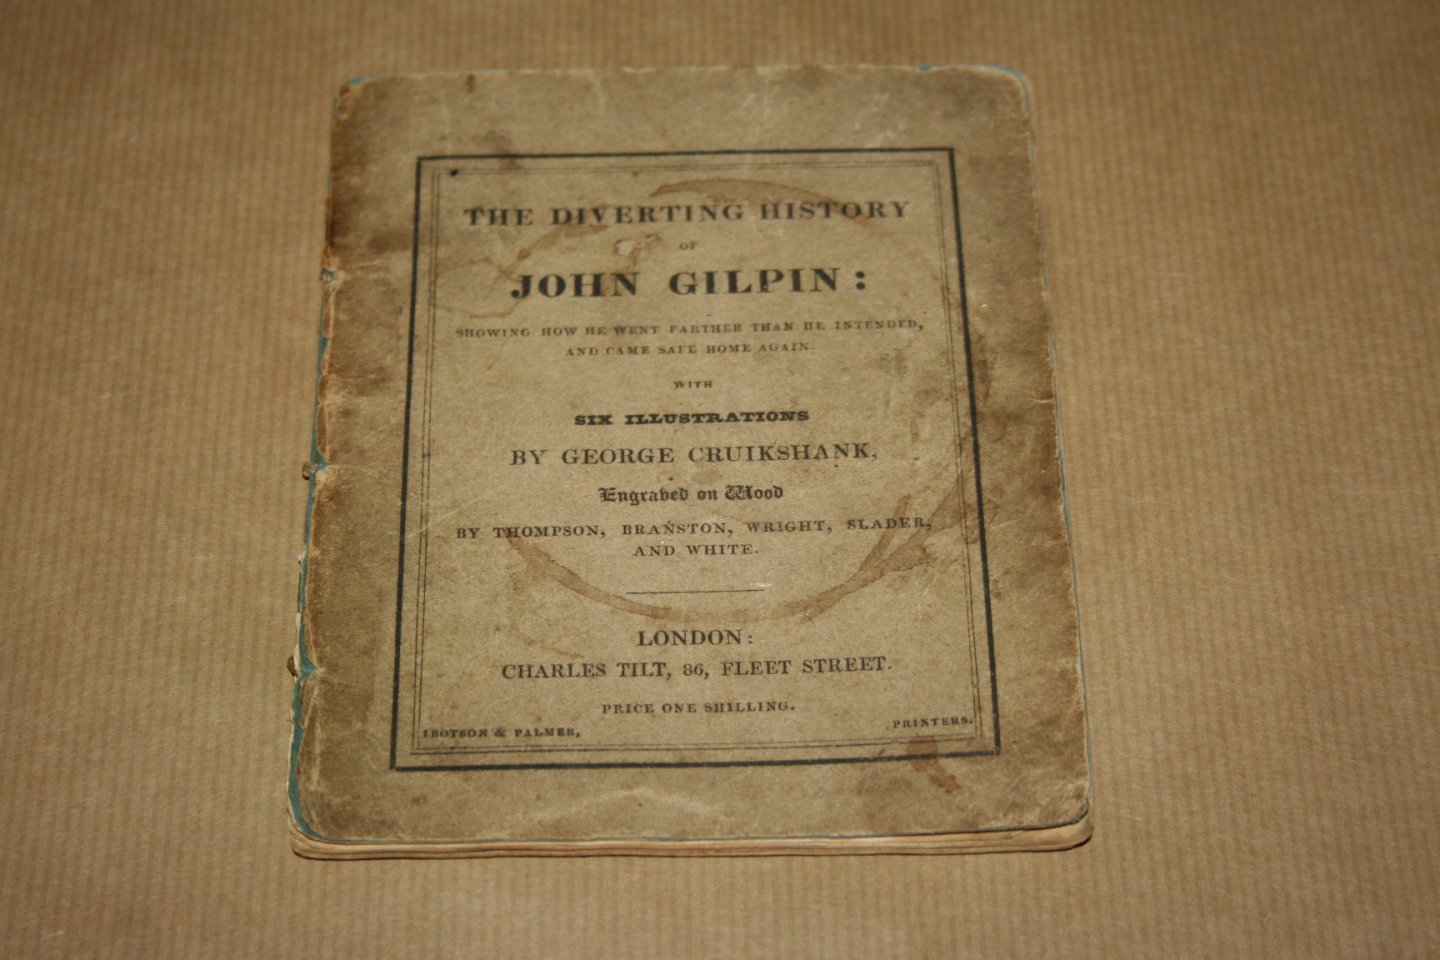 Illustrations by George Cruikshank - The diverting history of John Gilpin